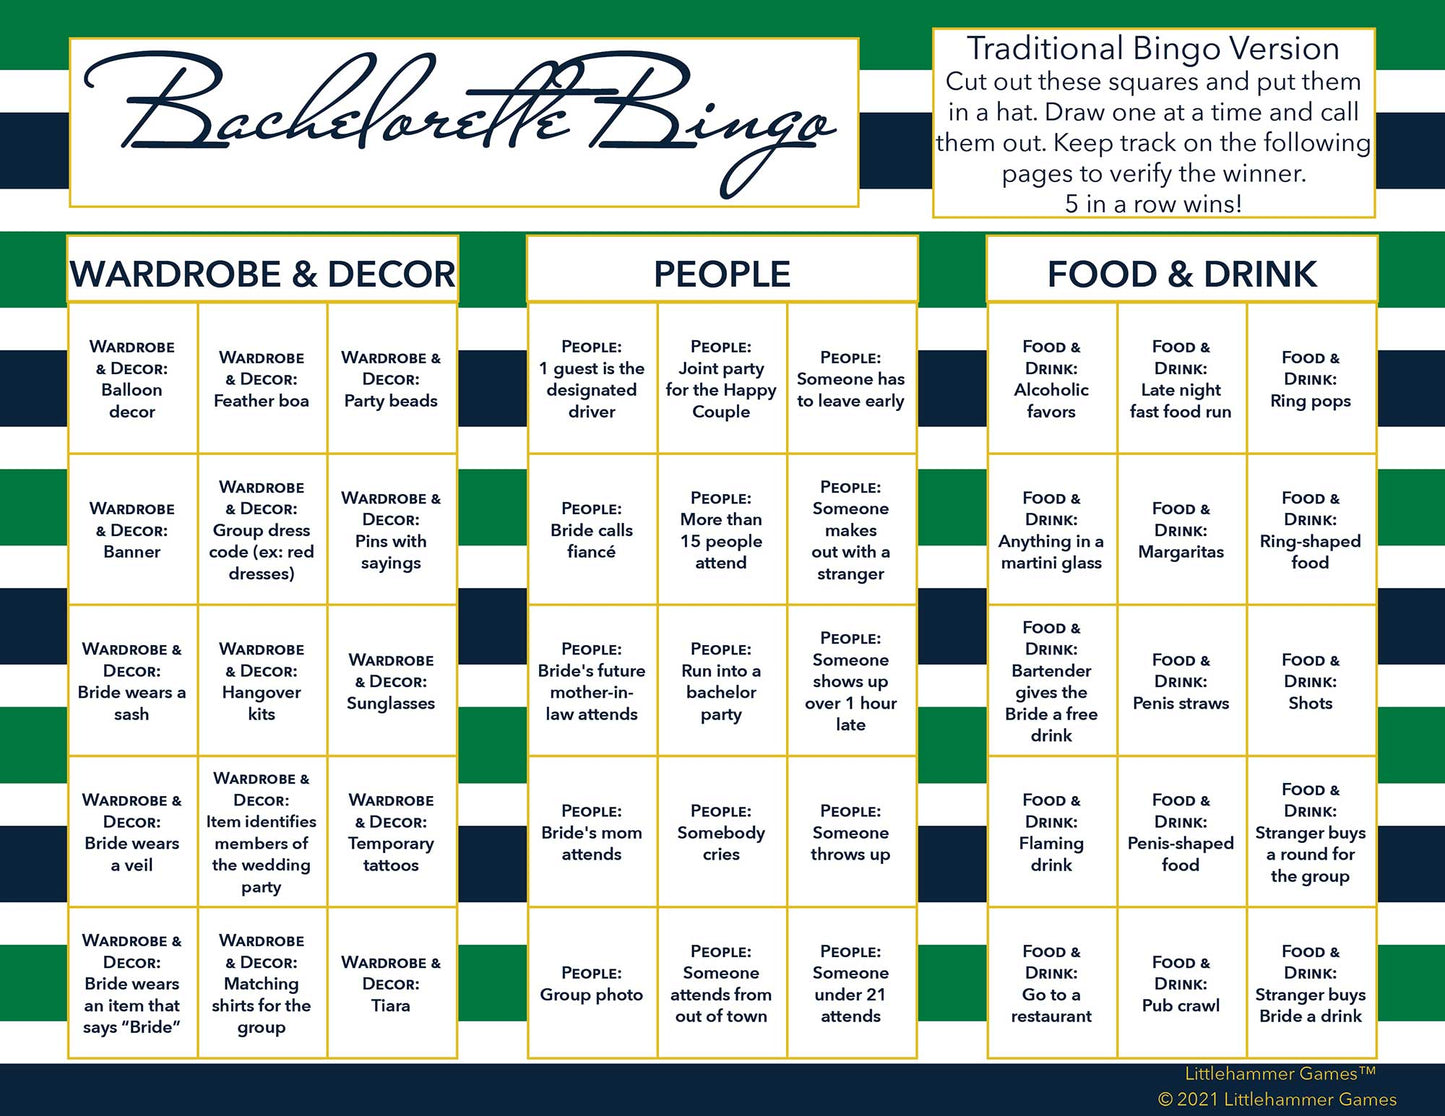 Bachelorette Bingo calling card with a green and navy-striped background